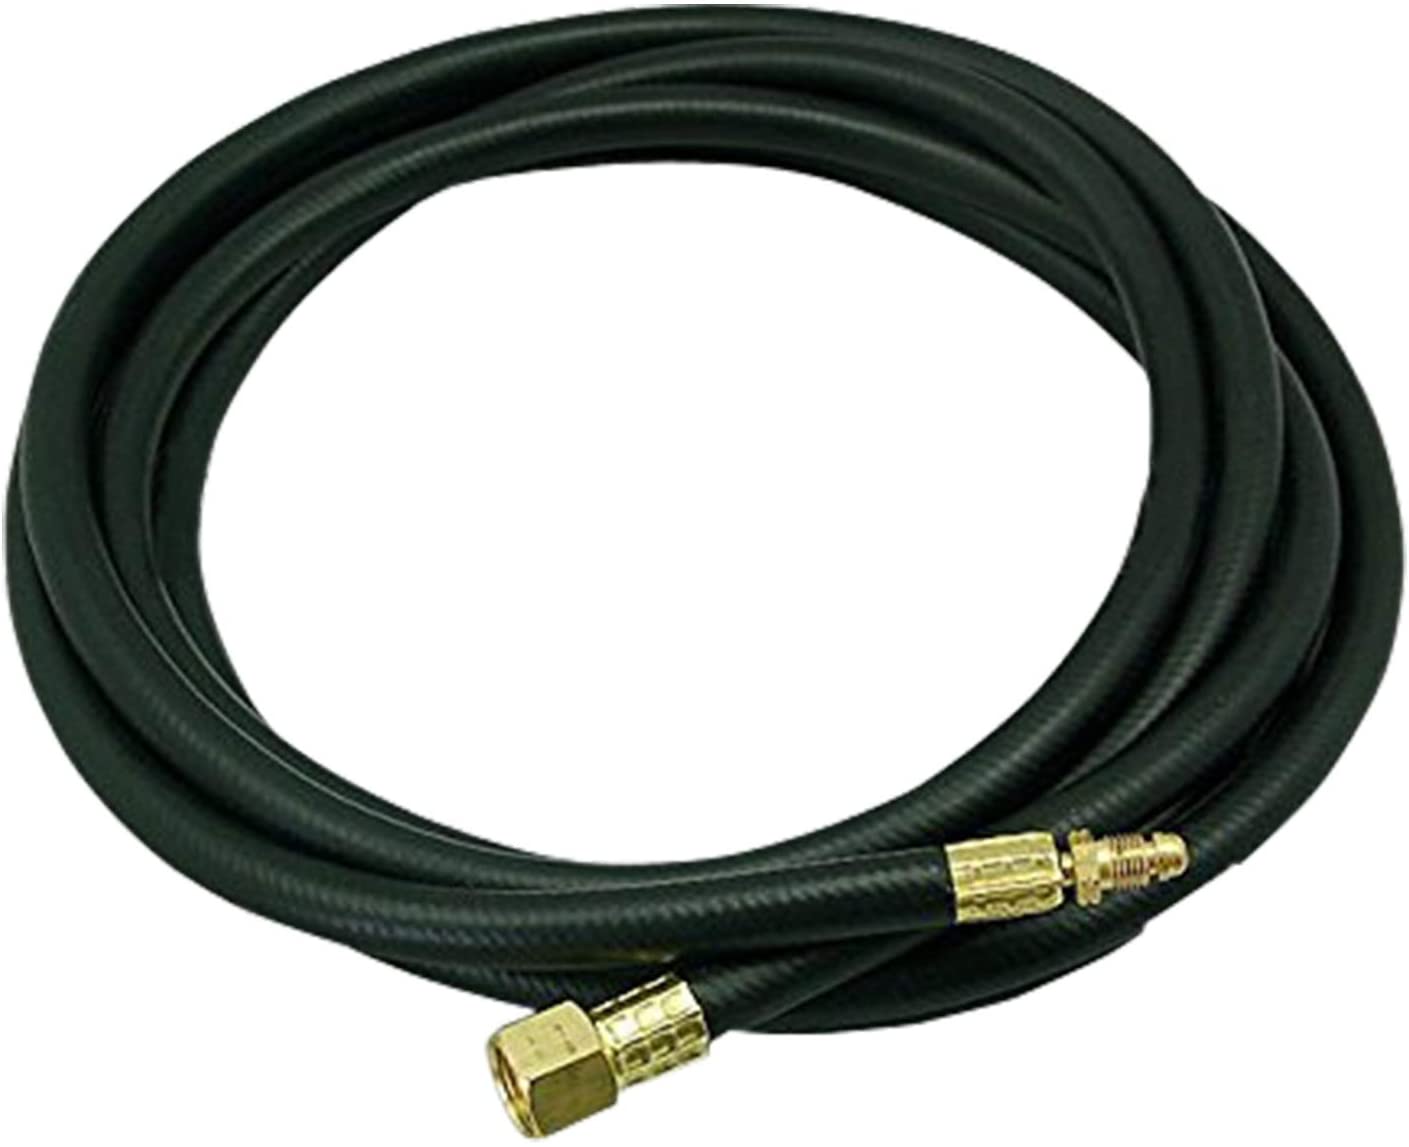 Power Cable Hose for WP-18 TIG Welding Torch 12" Feet Wire 10mm2 Connector M161.5 & 5/8-18 outside thread (WP-18 12")